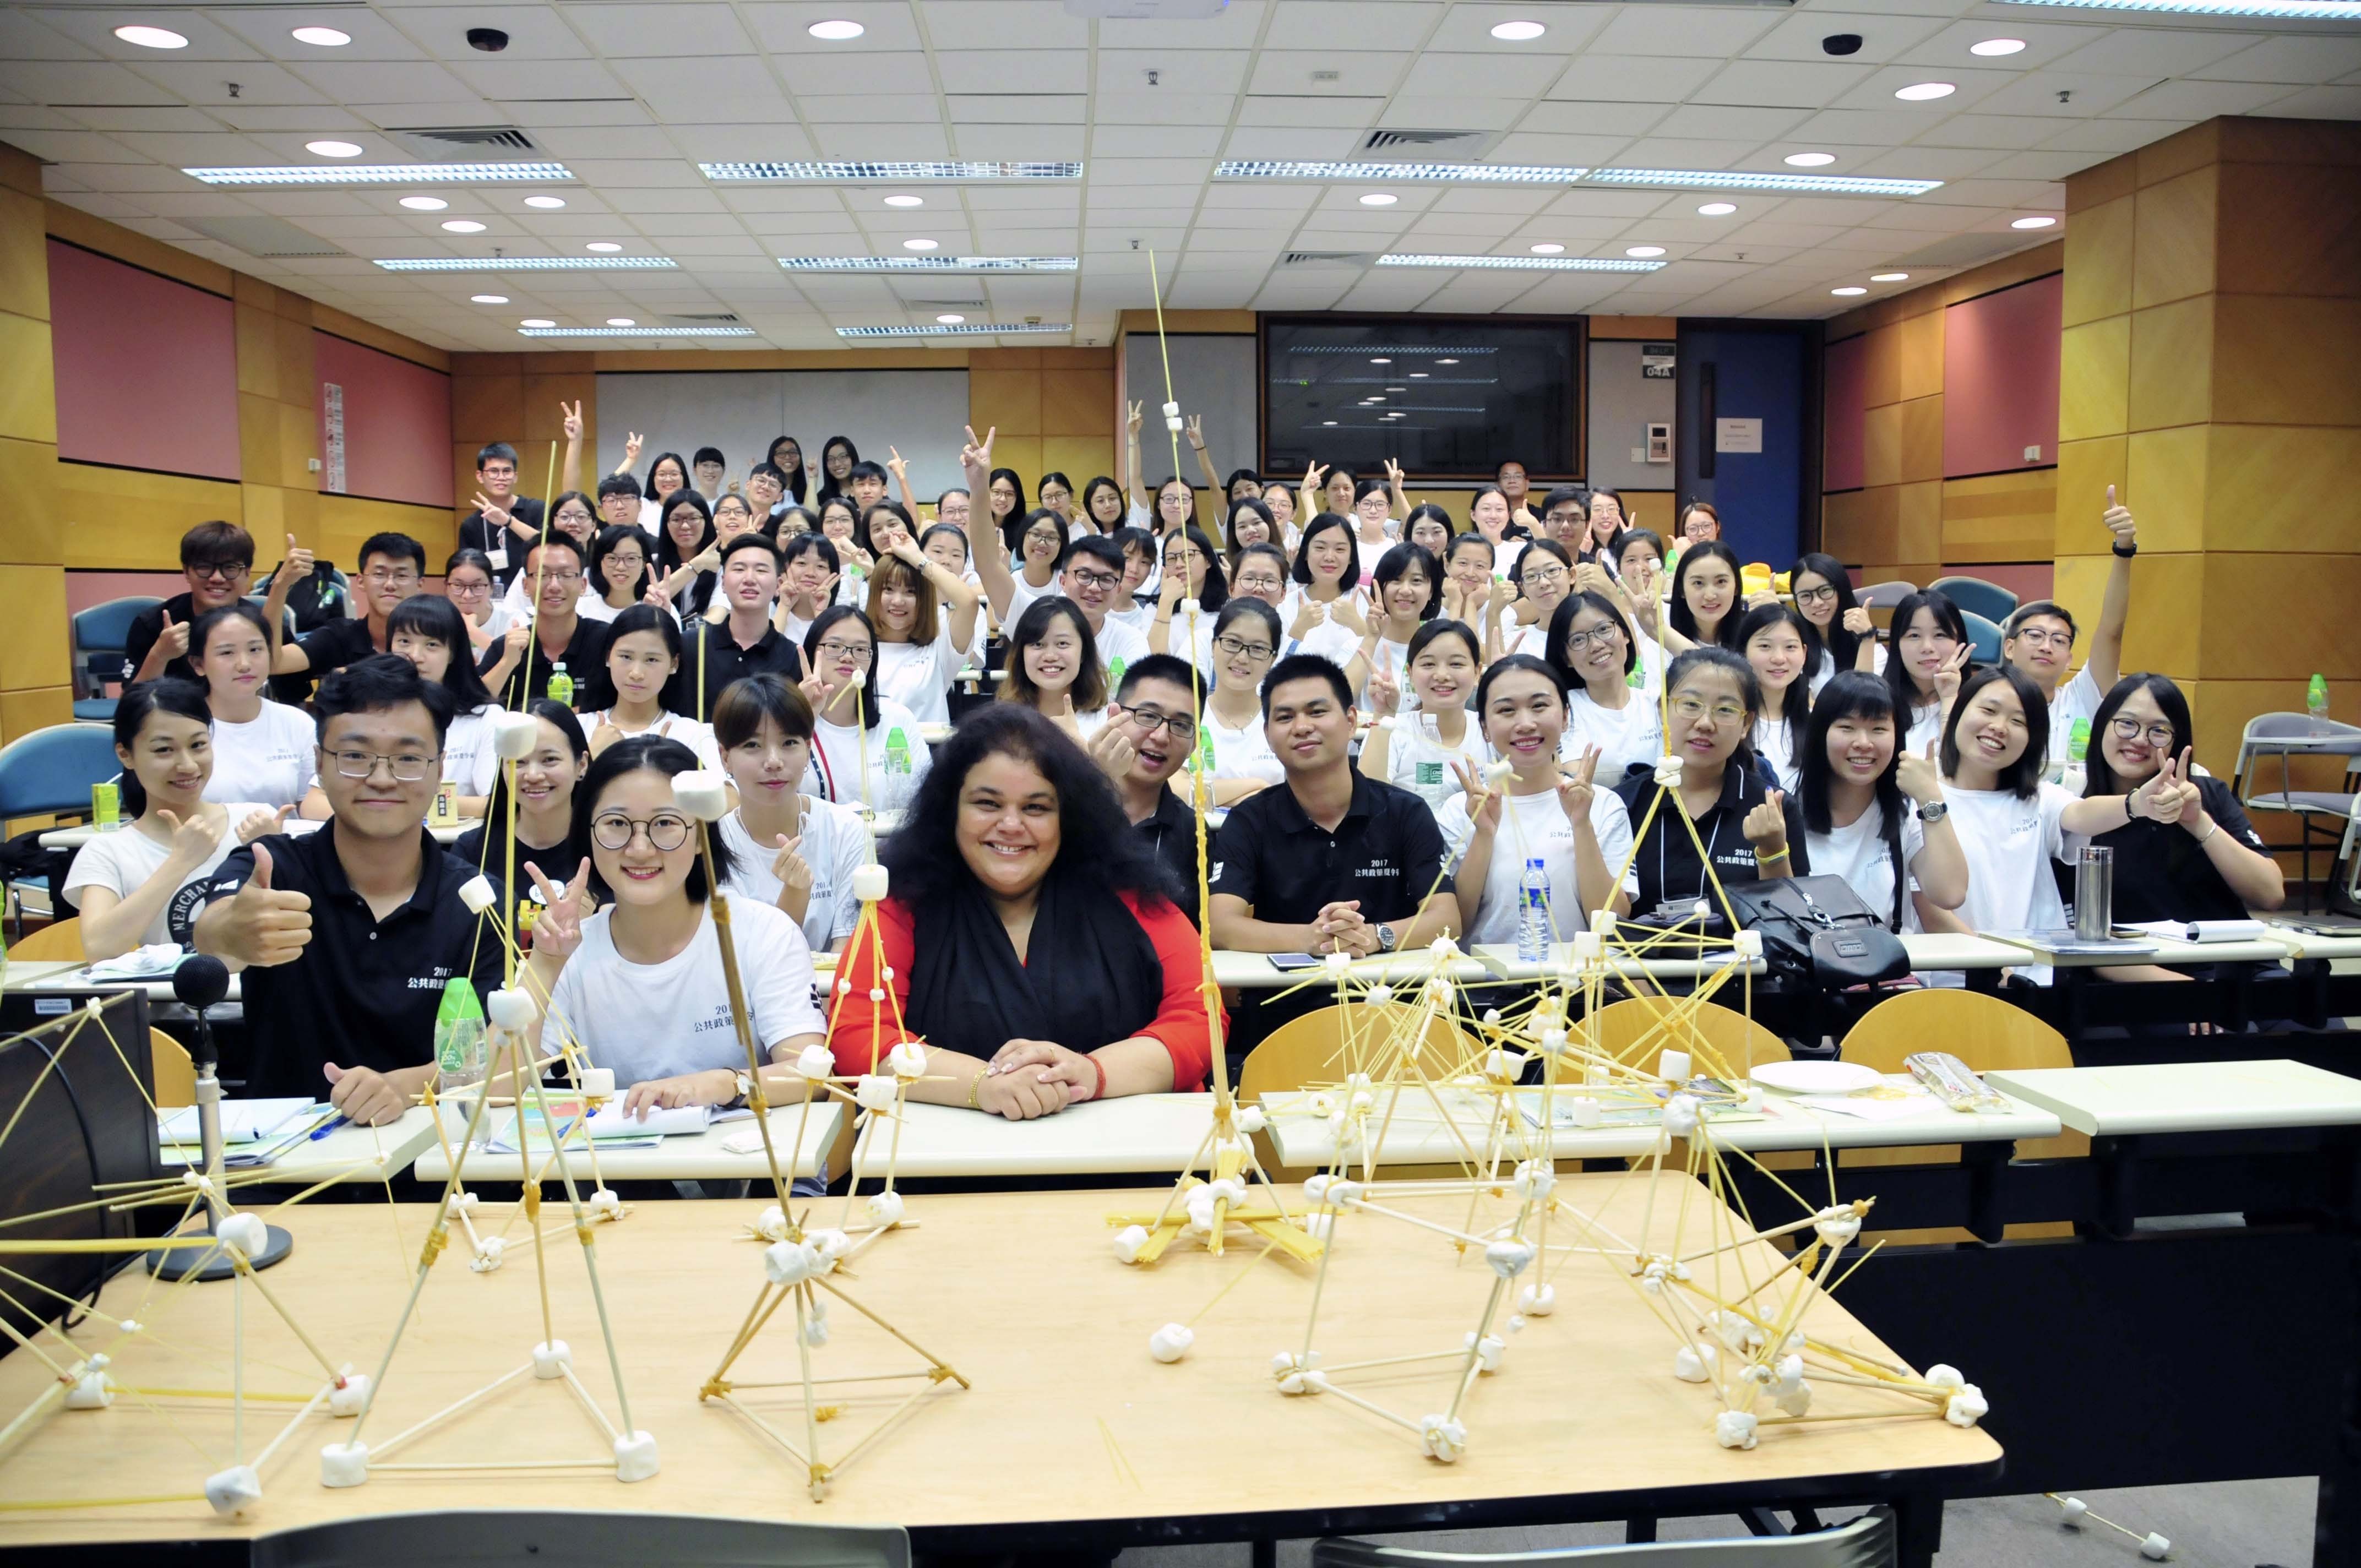 Subjects like governance and public management are gaining popularity as more students from mainland China pursue careers in human-resource management, says Dr Lina Vyas of EdUHK (in red).